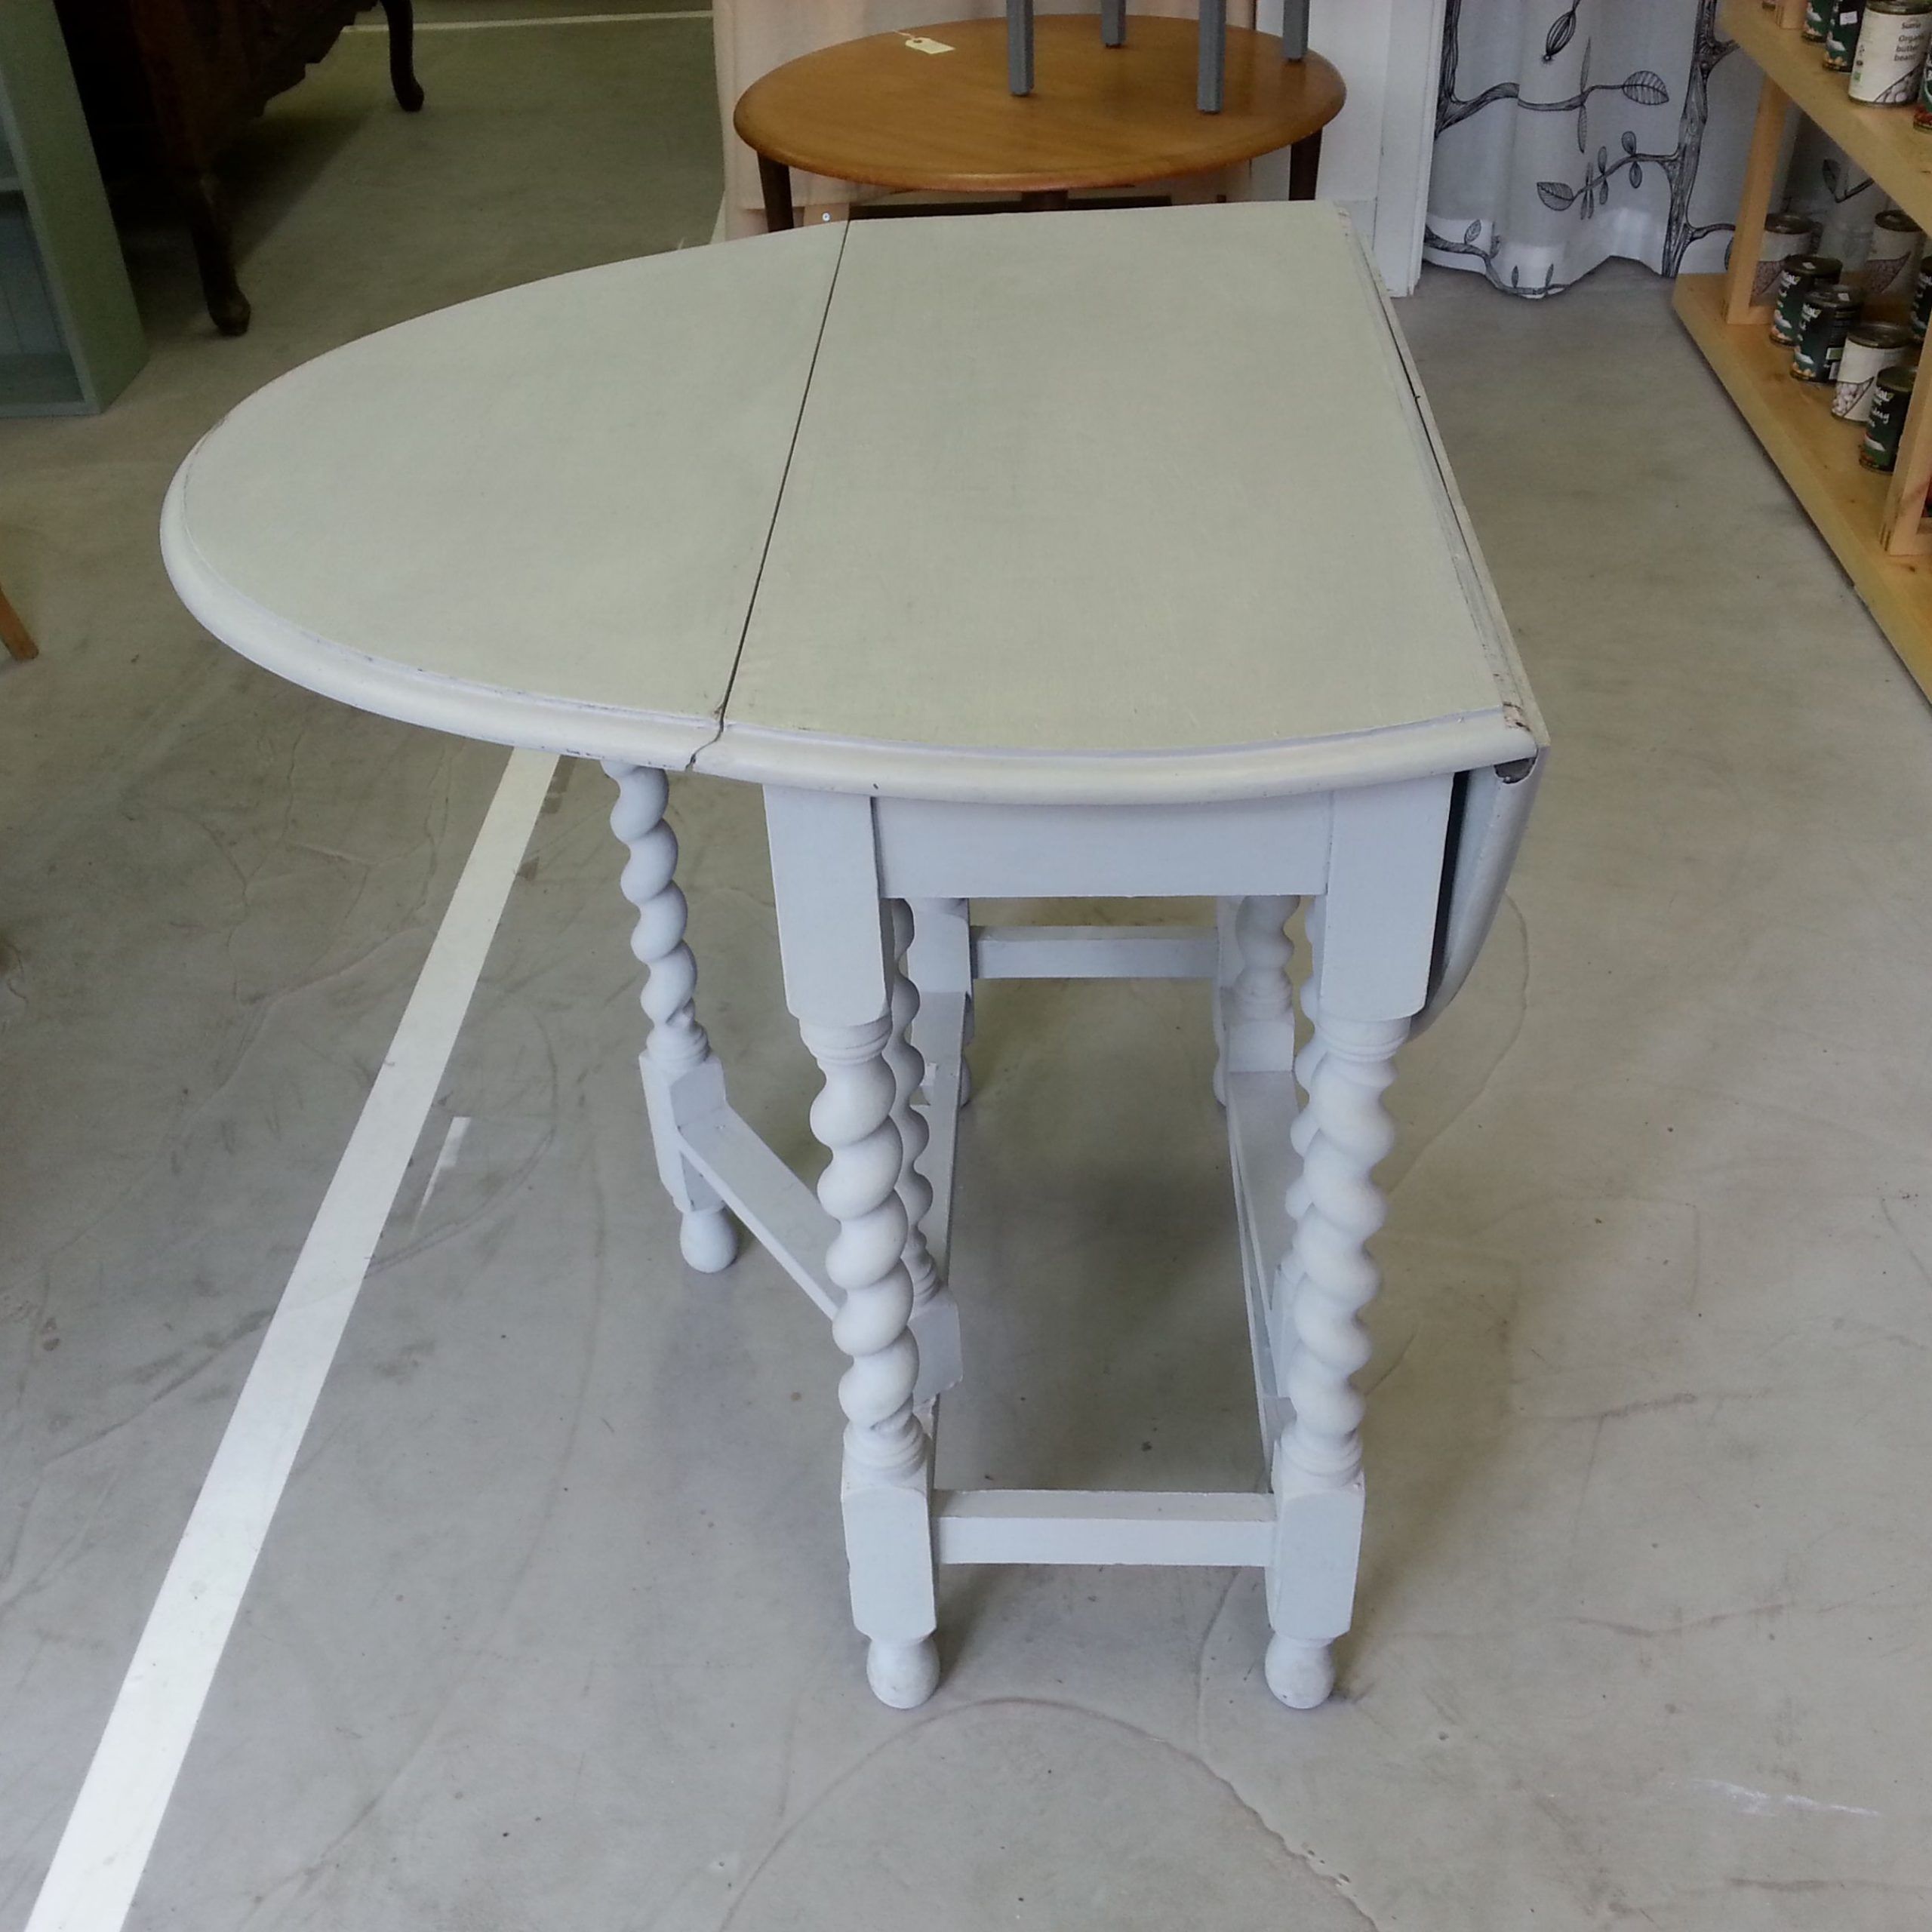 Small Drop Leaf Table With Barley Twist Legs In Paris Grey Chalkpaint Inside Gray Drop Leaf Console Dining Tables (Photo 11 of 15)